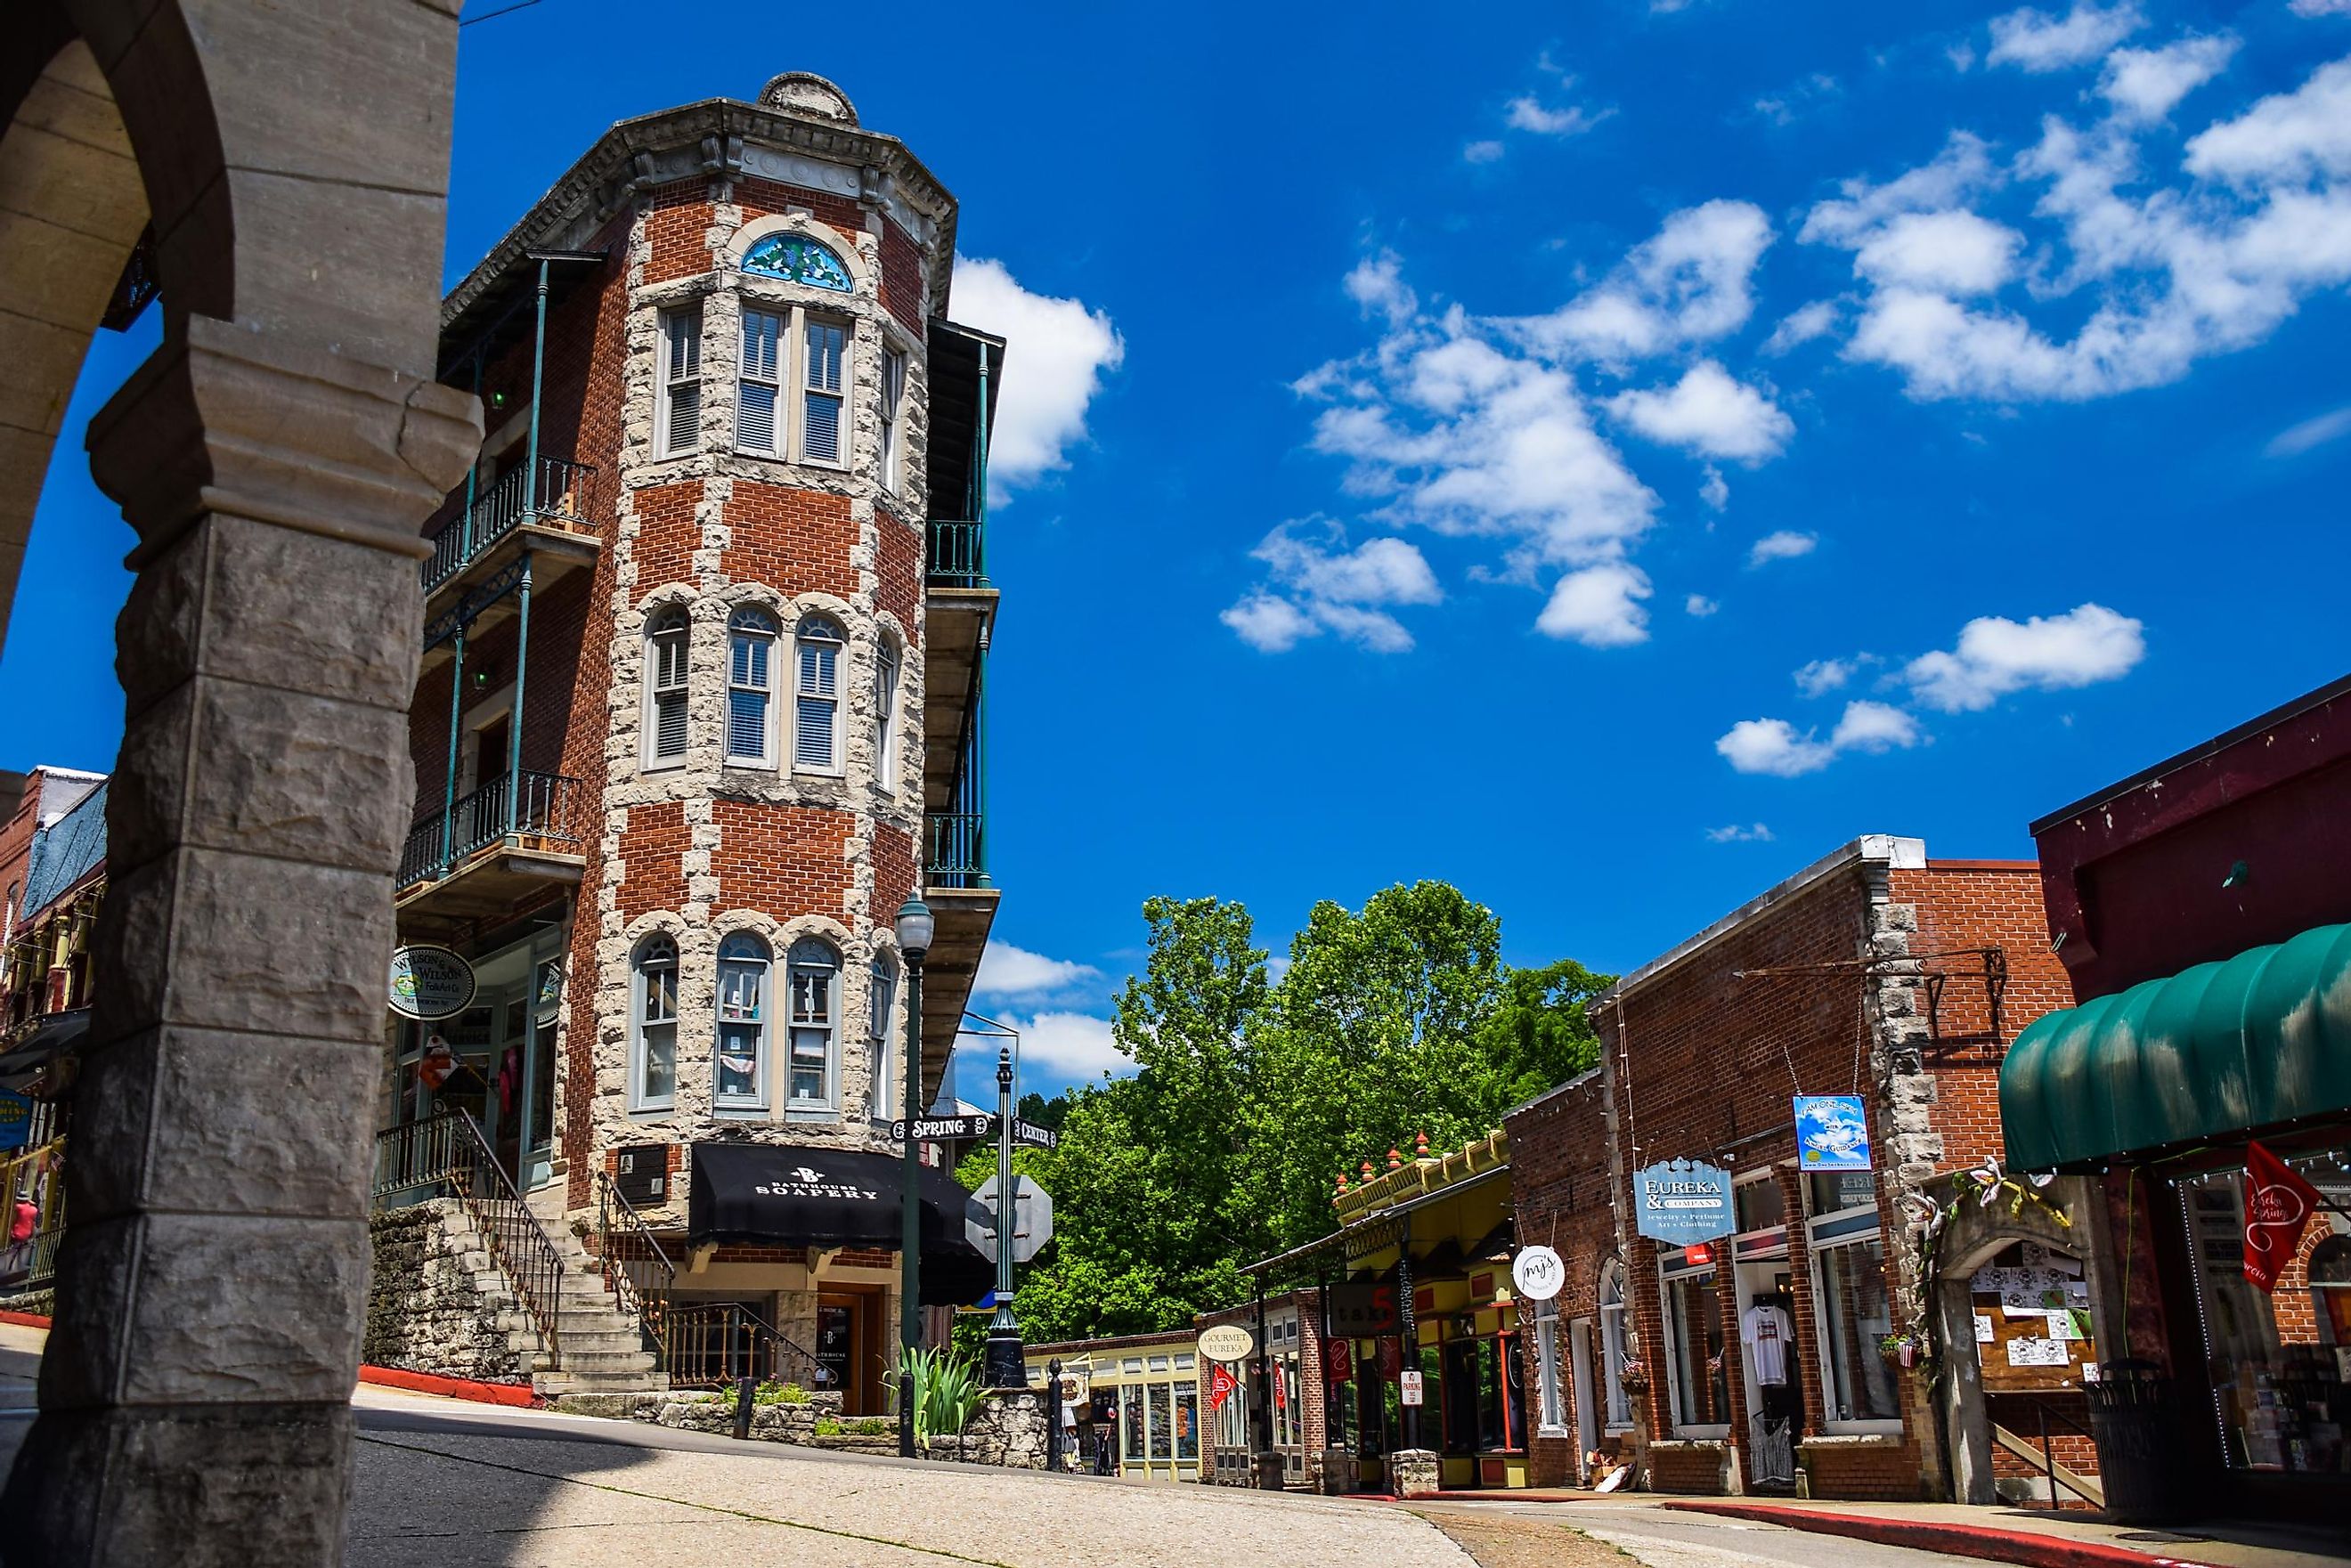 Eureka Springs, Arkansas, USA - July 5, 2021: Historic downtown Eureka Springs, AR, with boutique shops and famous buildings. Editorial credit: Rachael Martin / Shutterstock.com